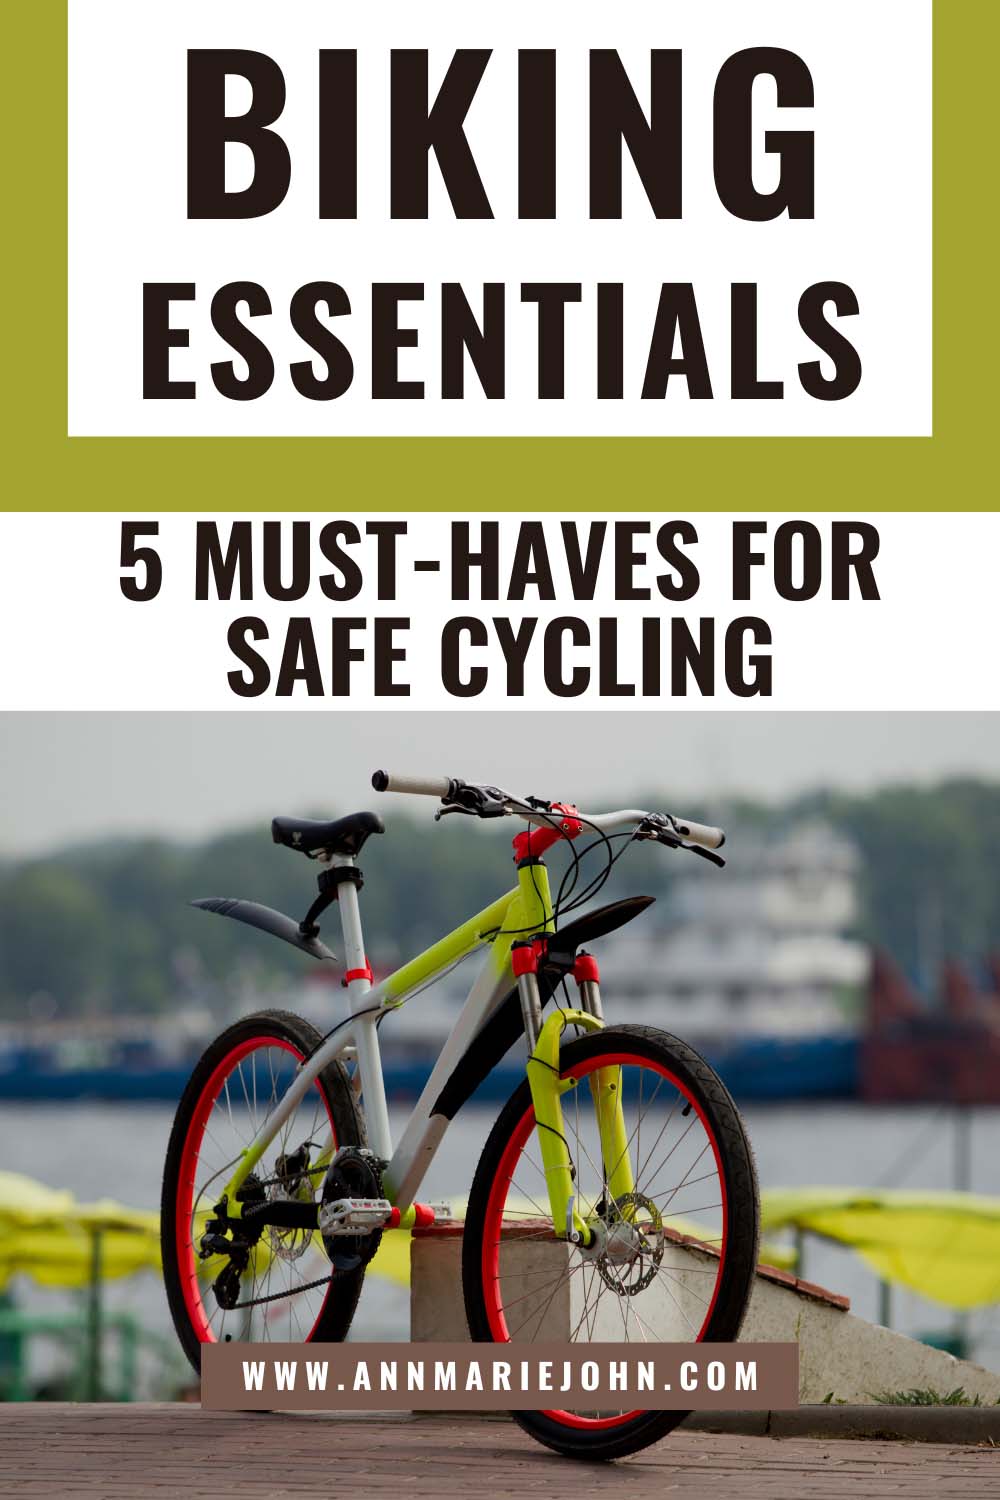 Biking Essentials: 5 Must-Haves for Safe Cycling